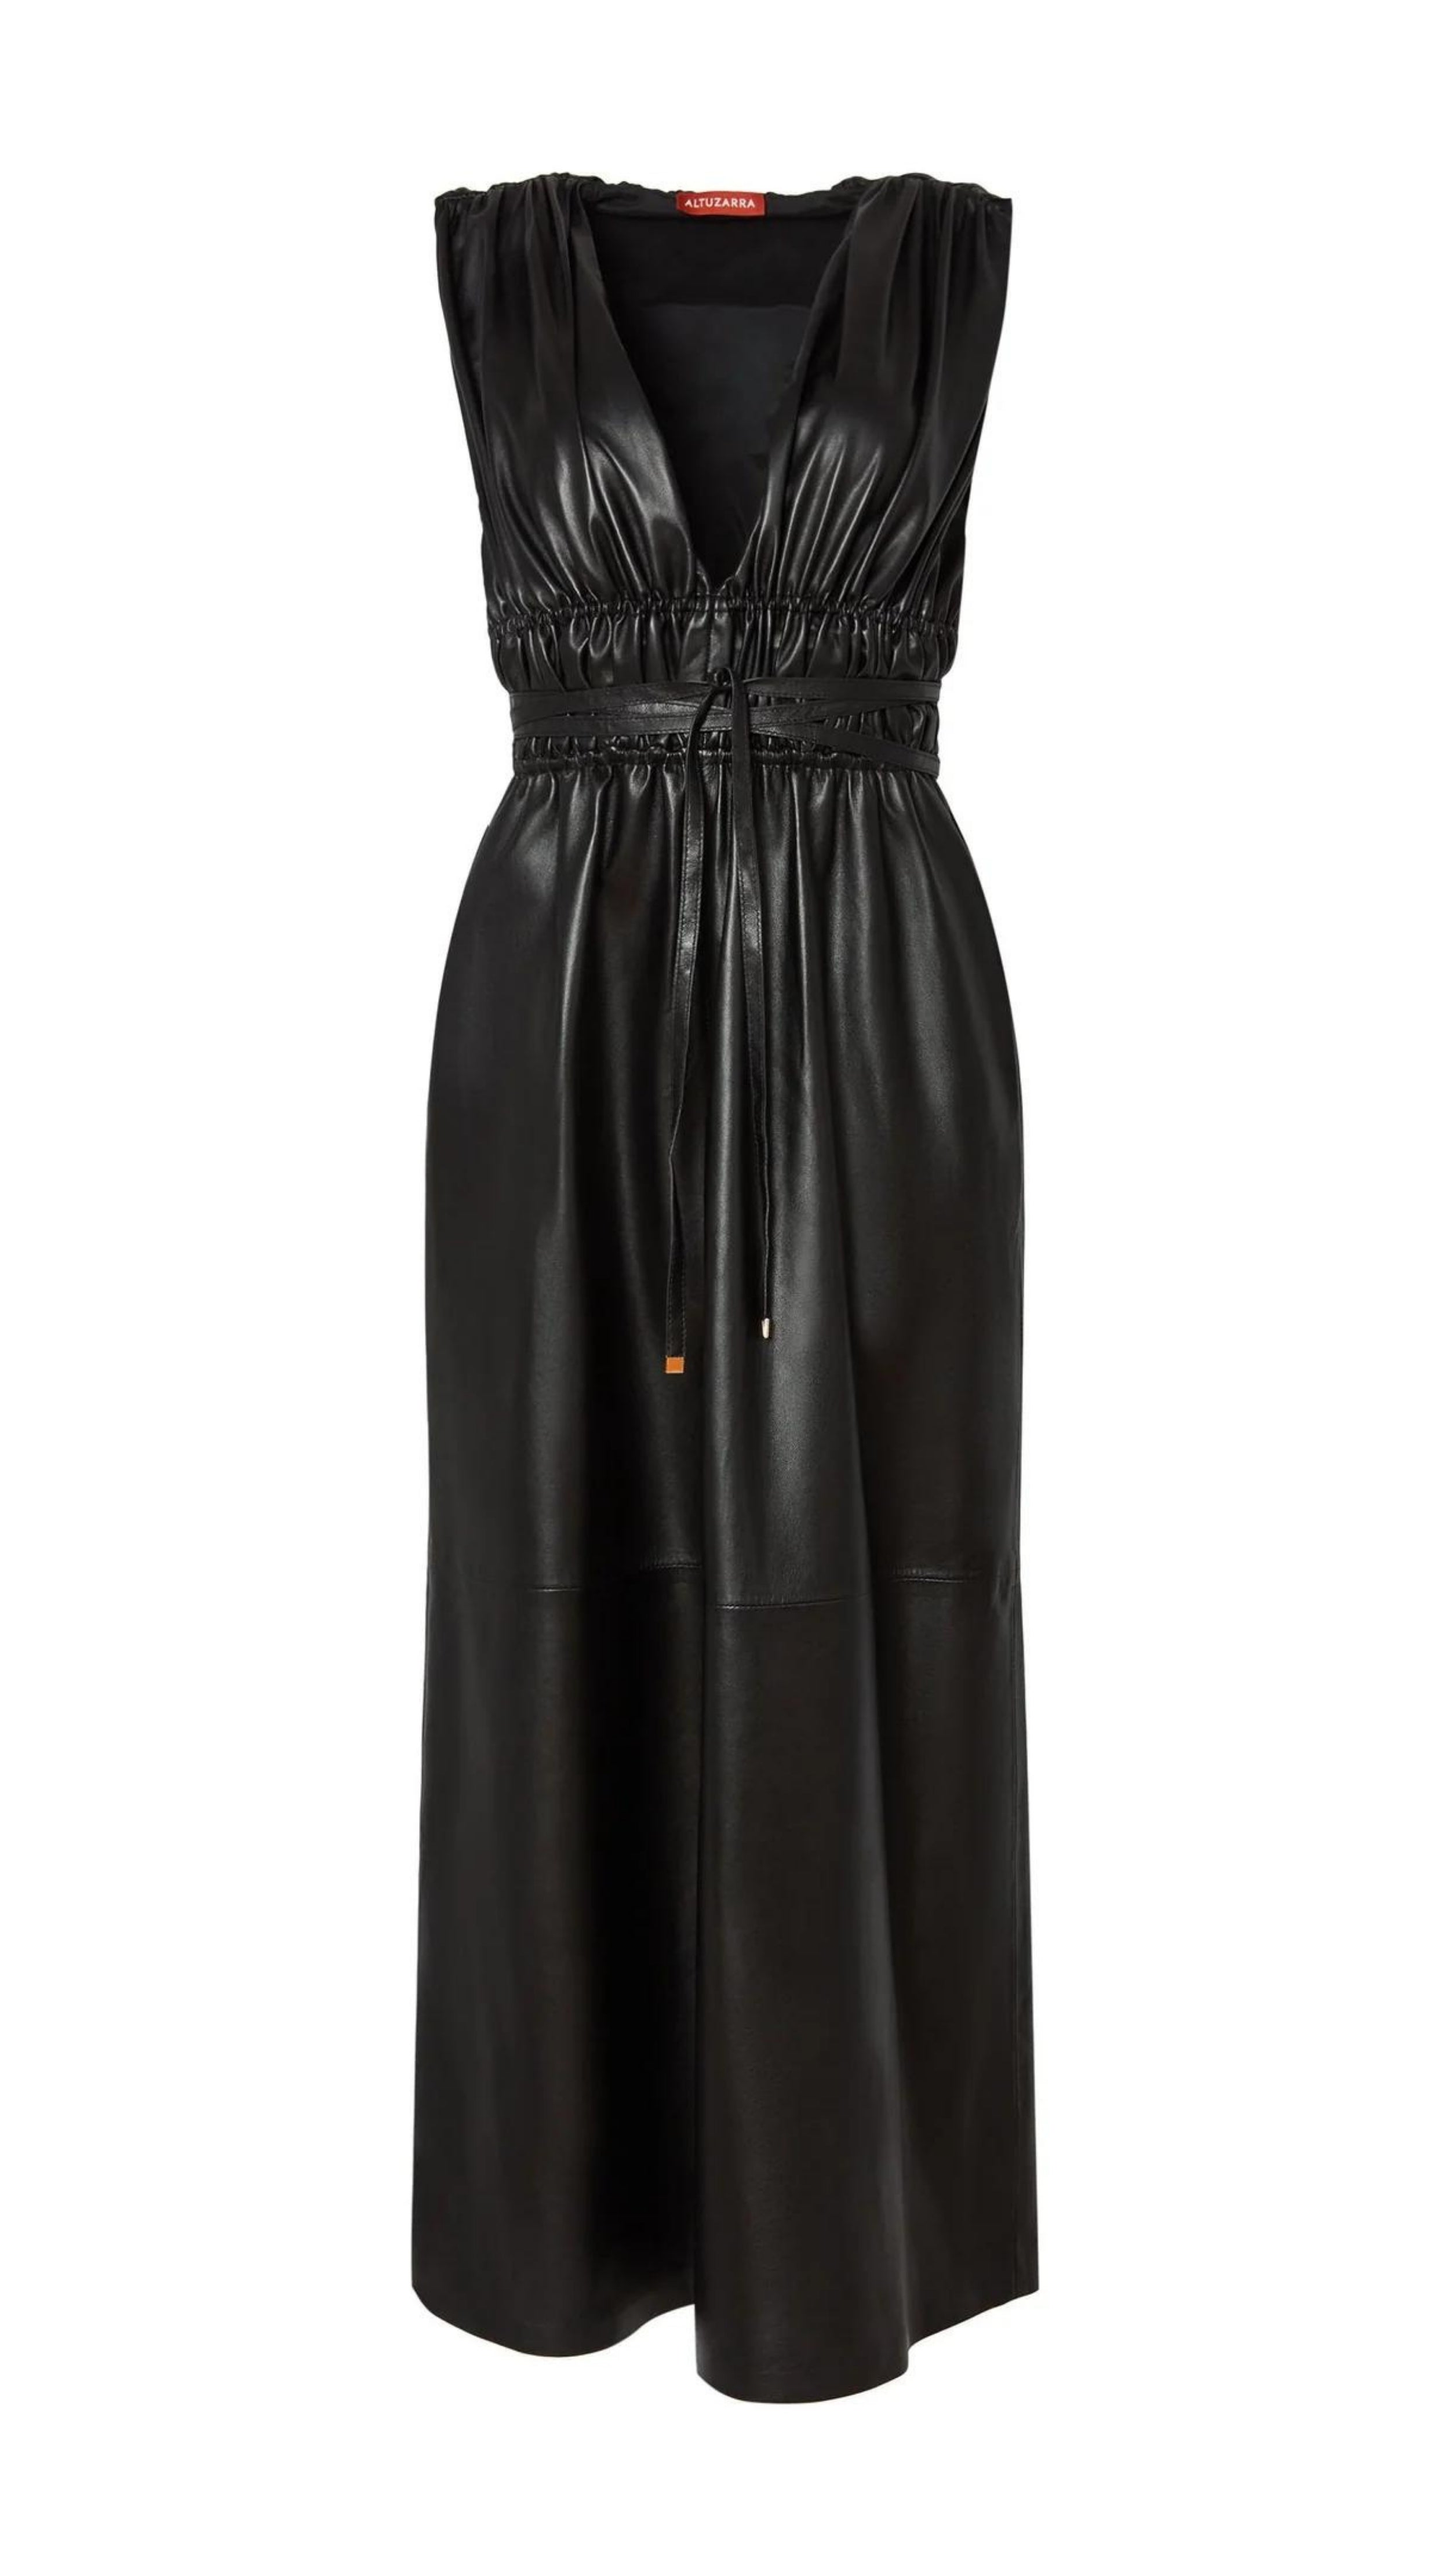 Altuzarra Fiona Dress, made from soft lamb leather. It features a maxi silhouette with a low V-neck, sleeveless, and ruching that folds at the waist with a thin leather belt. Product photo facing front.